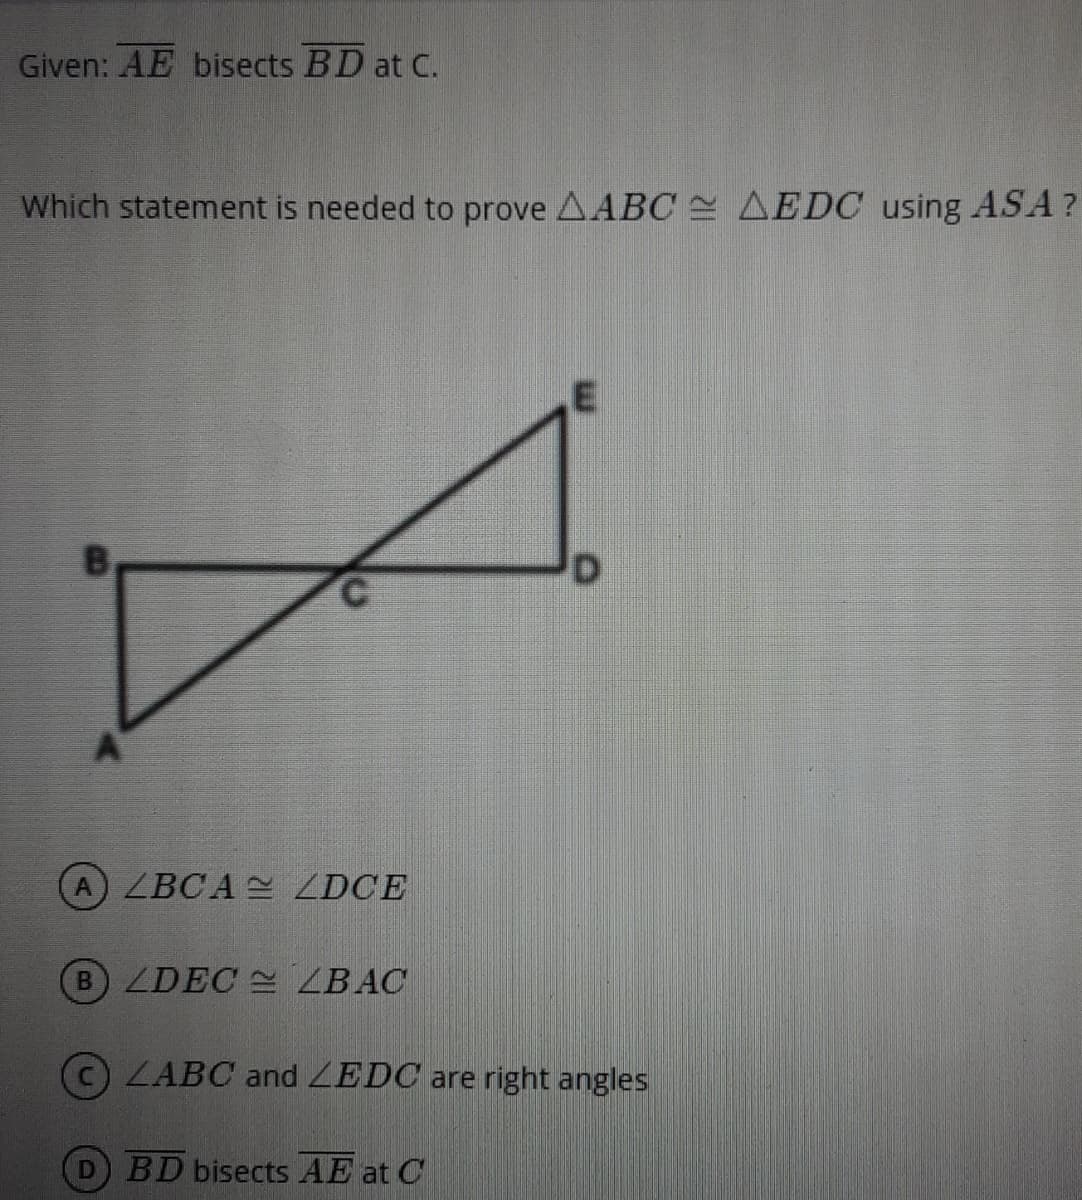 Given: AE bisects BD at C.
Which statement is needed to prove AABC E AEDC using ASA?
D.
A ZBCA ZDCE
B ZDEC ZBAC
ZABC and ZEDC are right angles
BD bisects AE at C
